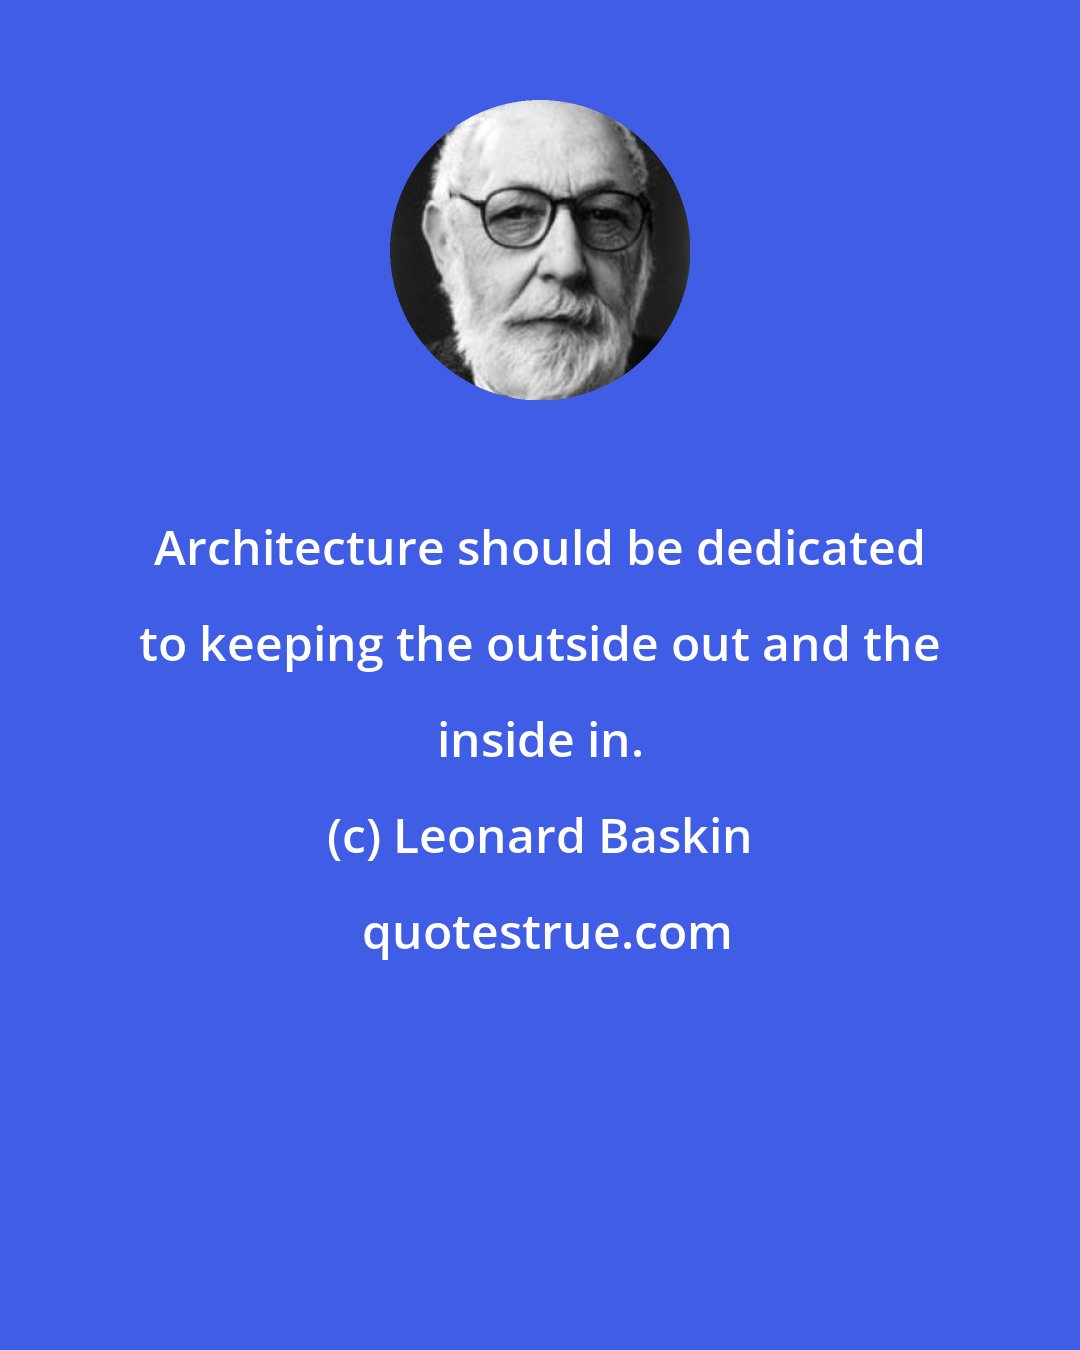 Leonard Baskin: Architecture should be dedicated to keeping the outside out and the inside in.